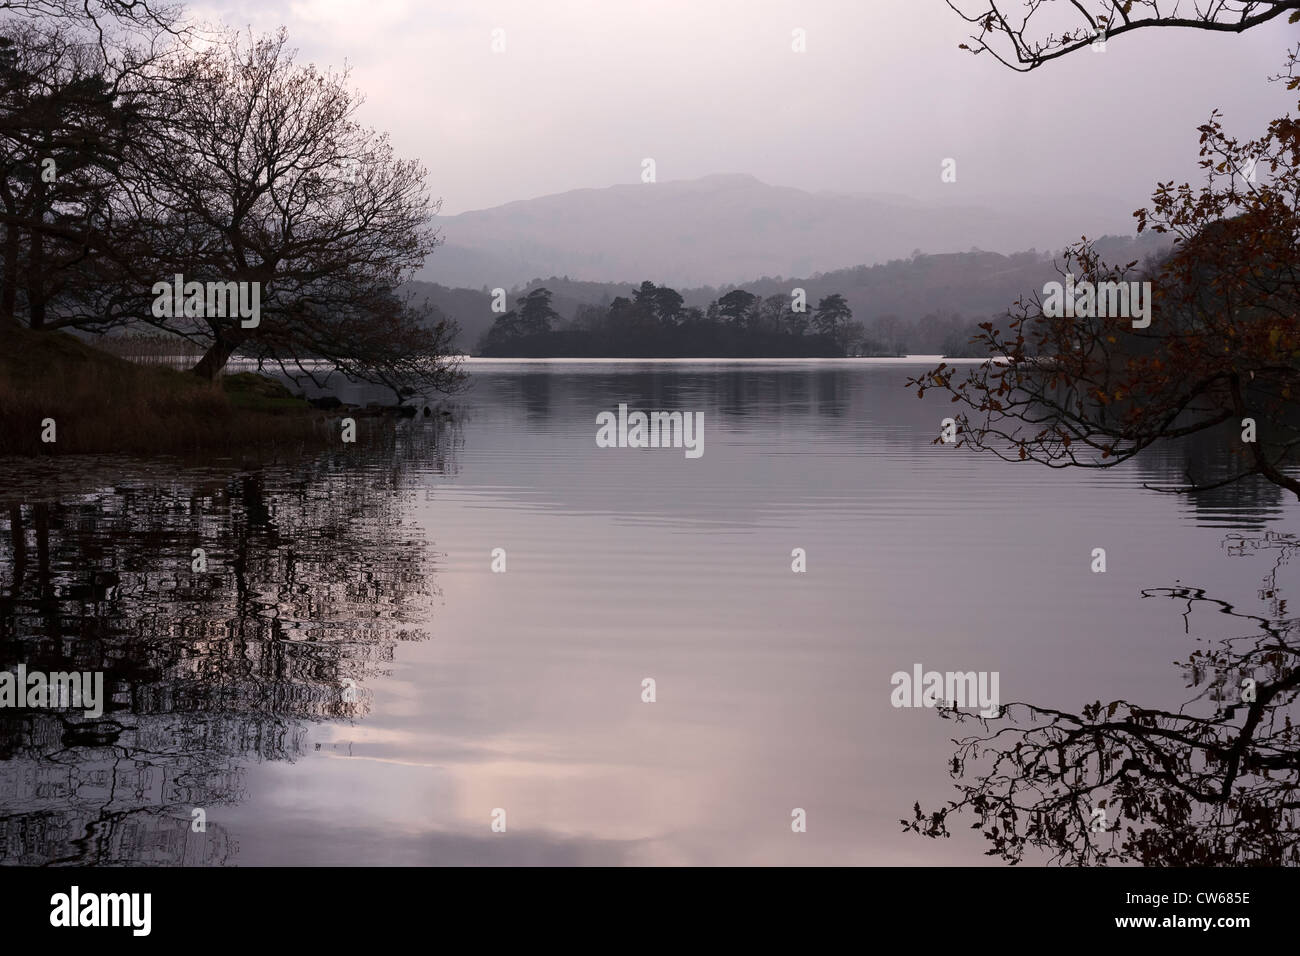 Rydal Water on a calm, grey misty Autumn day, Rydal, Lake District, Cumbria, England, UK Stock Photo